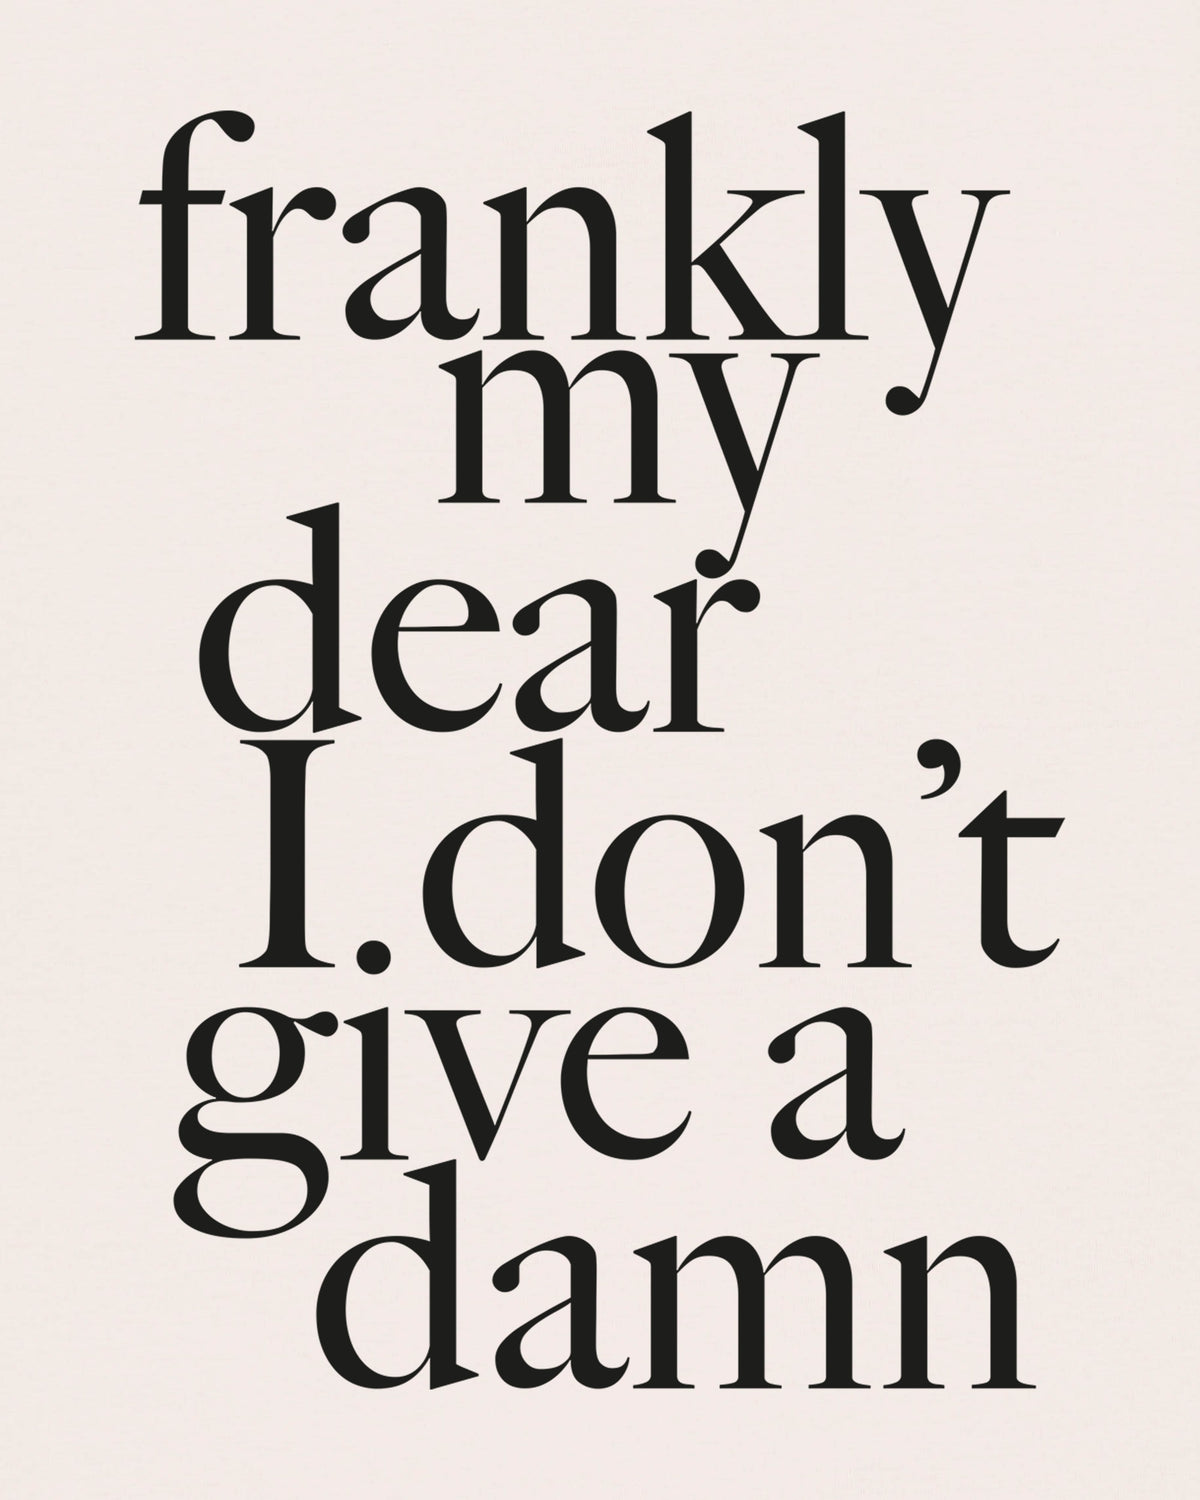 Frankly my dear